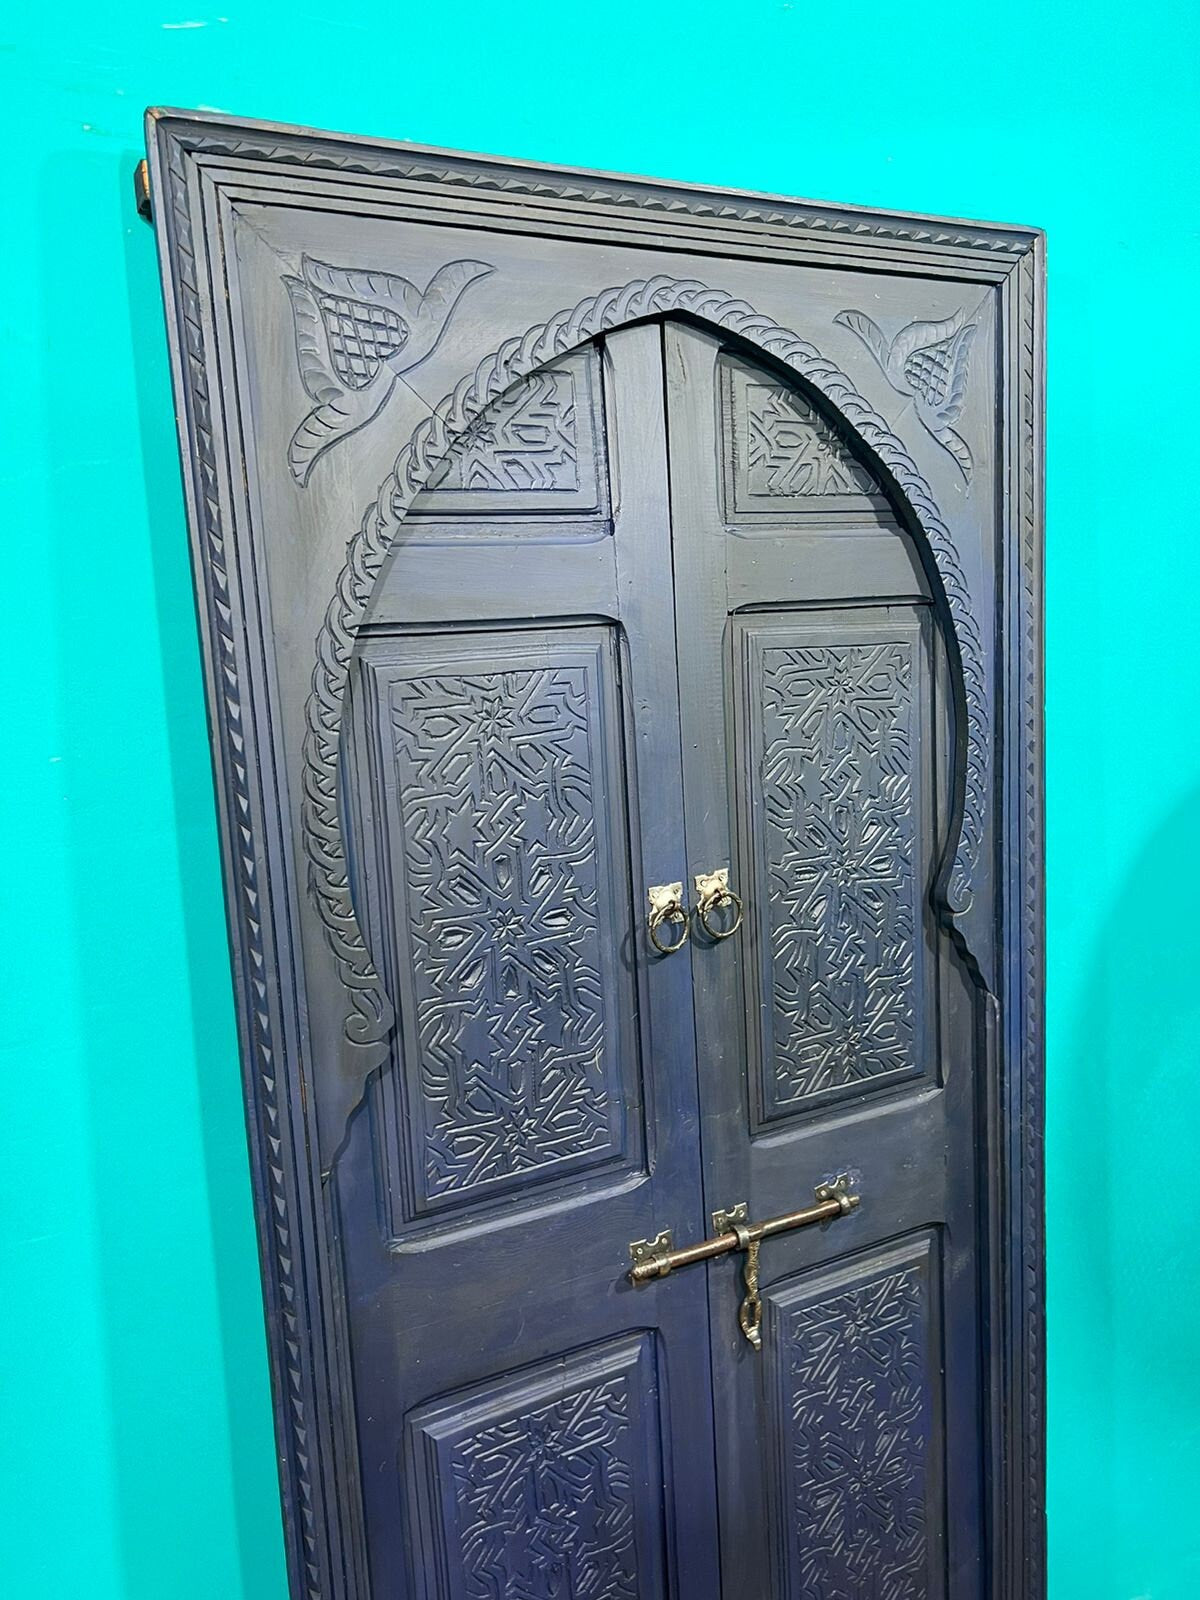 Wooden Carved Blue Moroccan Door - Hand Painted, Distressed, Vintage, Antique, Blue Wooden Large Door Crafted with Best Quality of Wood